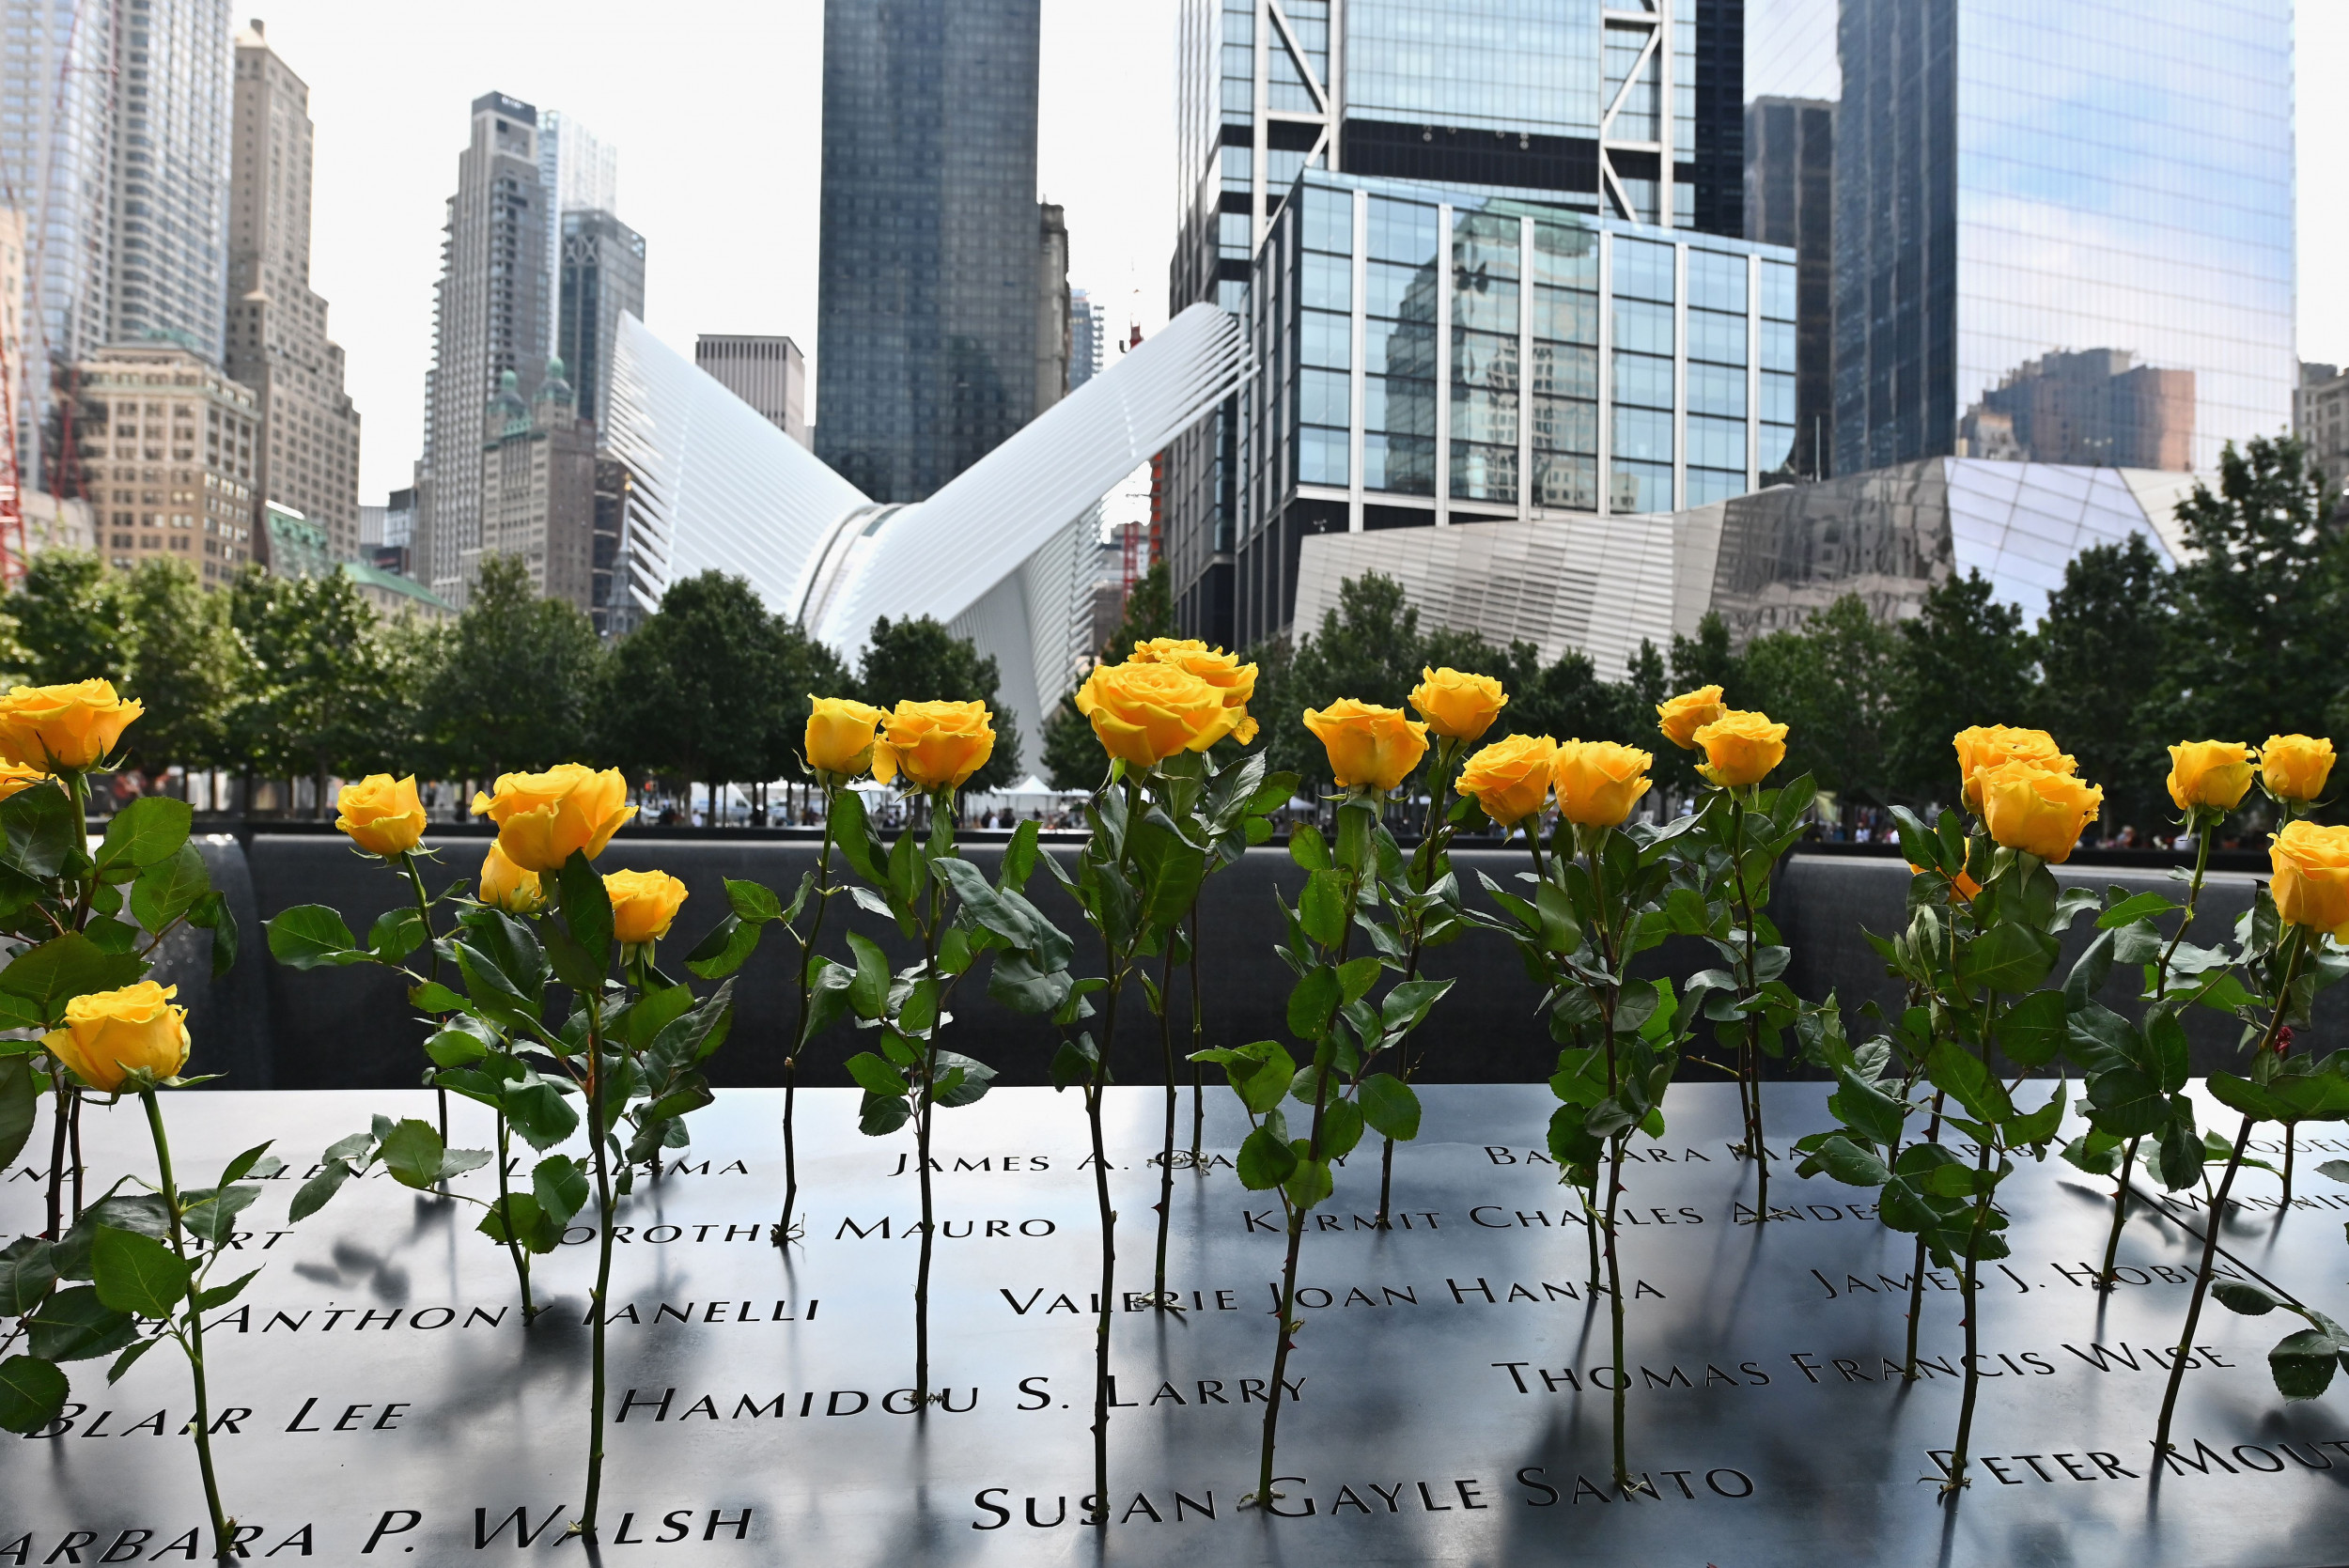 9/11 Memorial 2021 Start Time and How to Stream Online